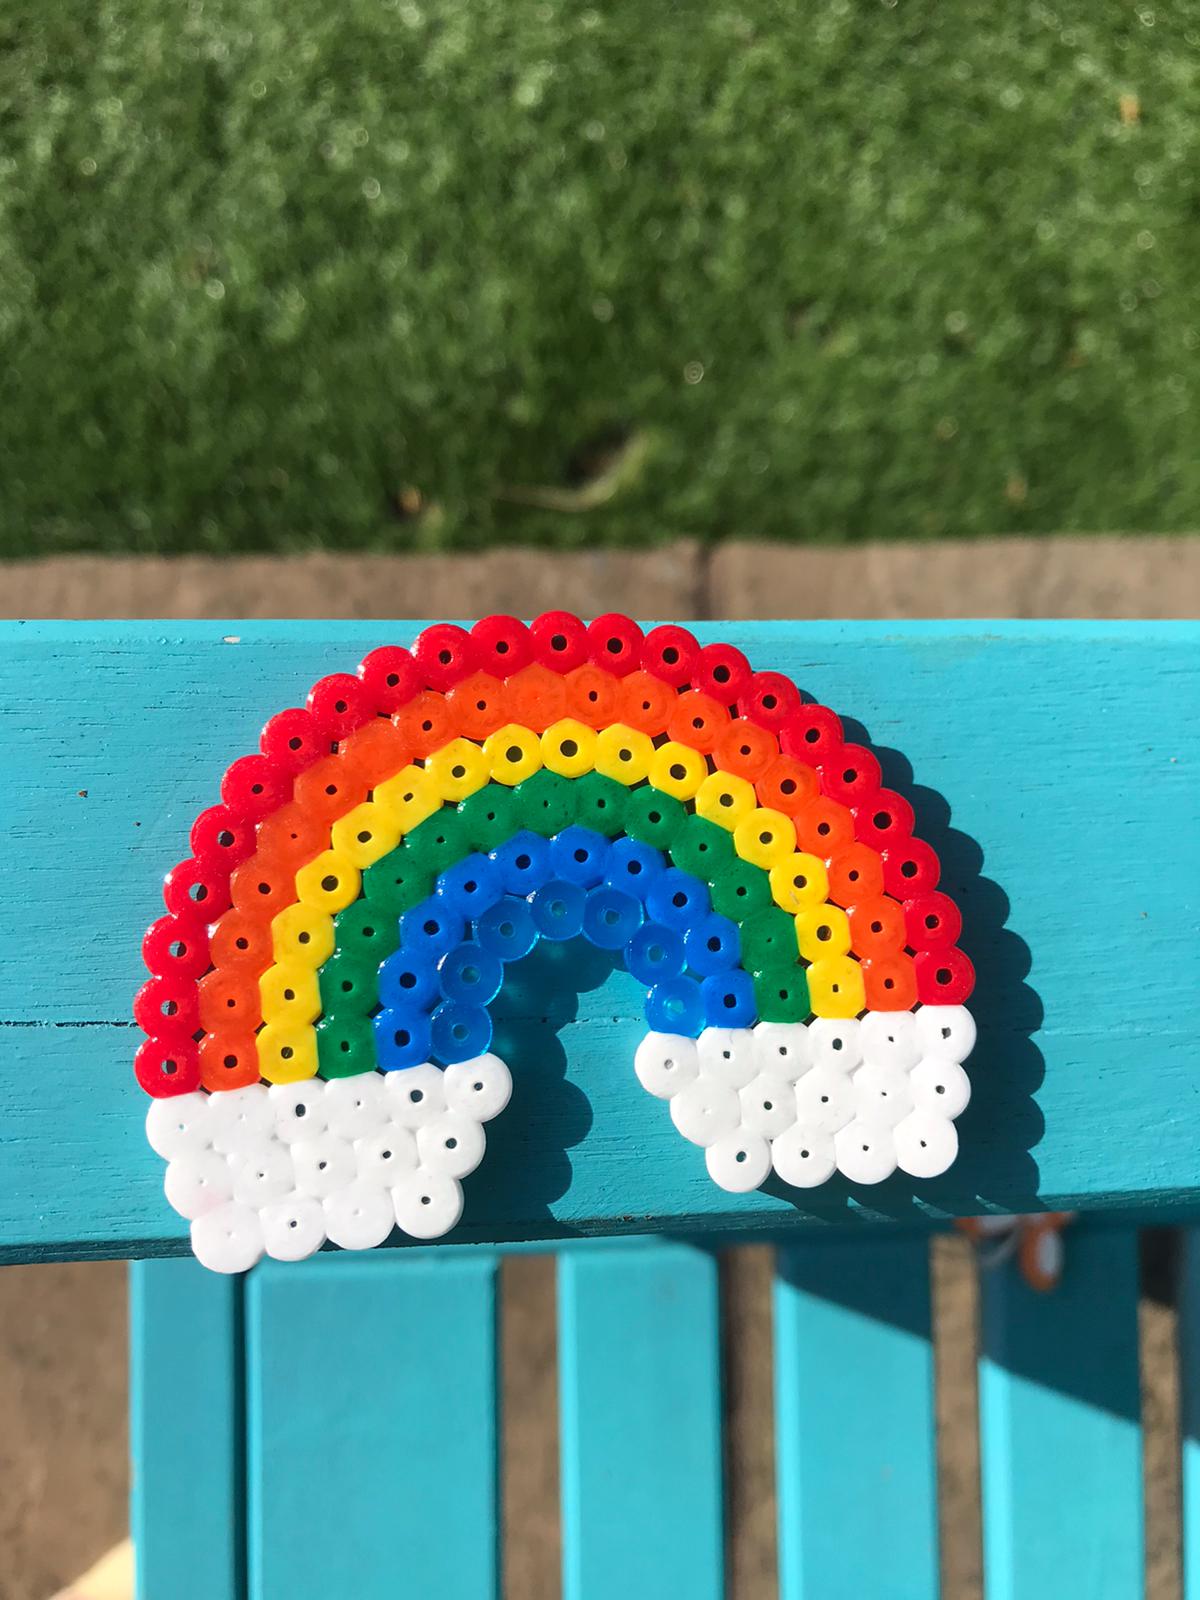 A rainbow made with beads